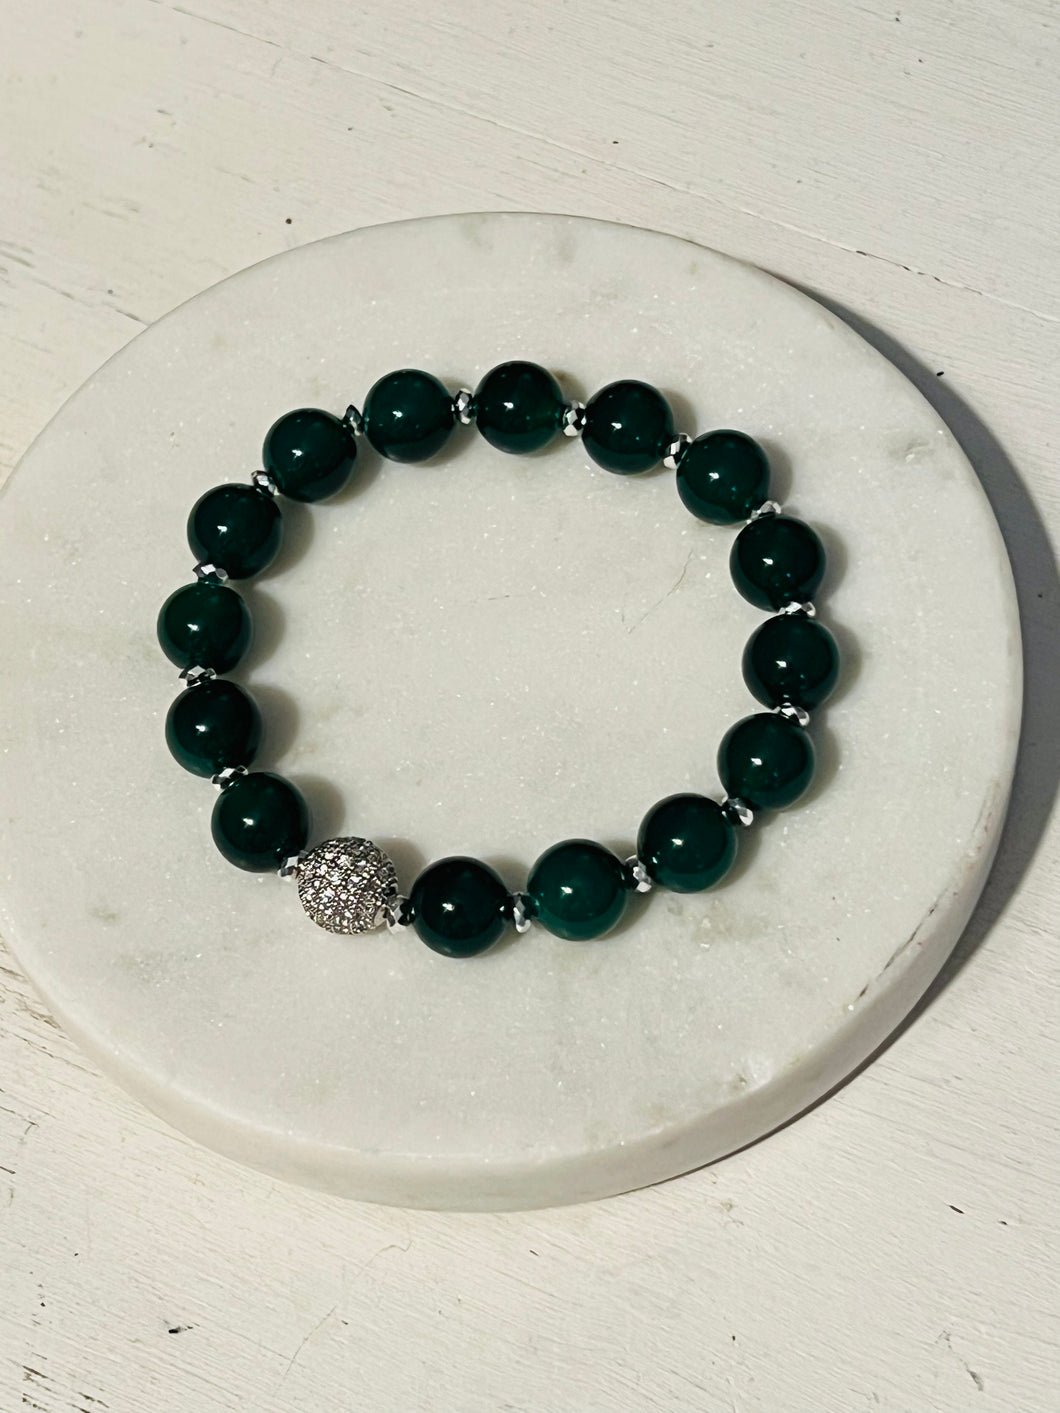 10mm Green Agate and Silver Hematite Pave Bracelet